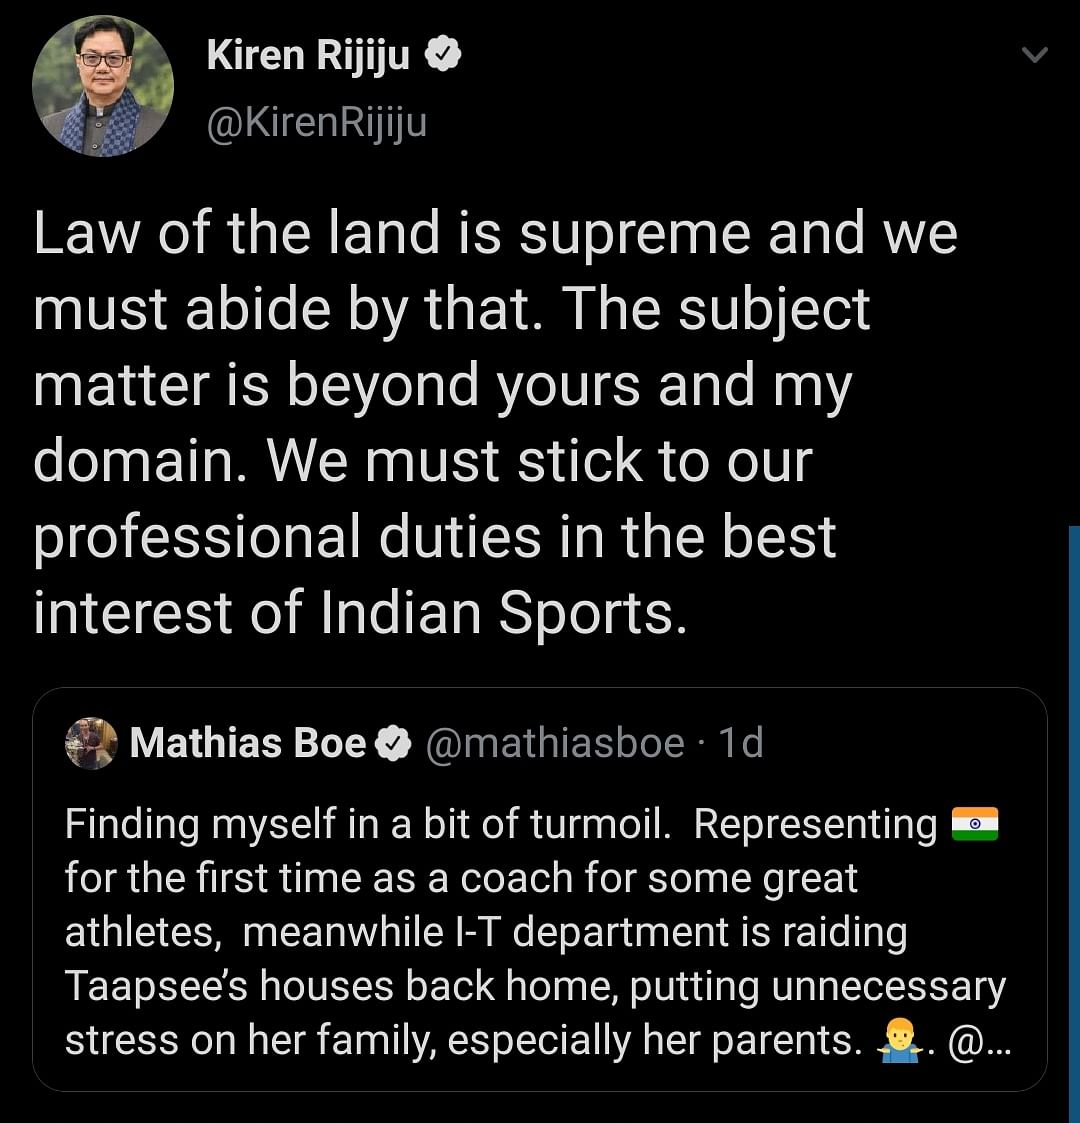 After Boe tweeted at Kiren Rijju, he replied saying they should focus on their ‘professional duties’